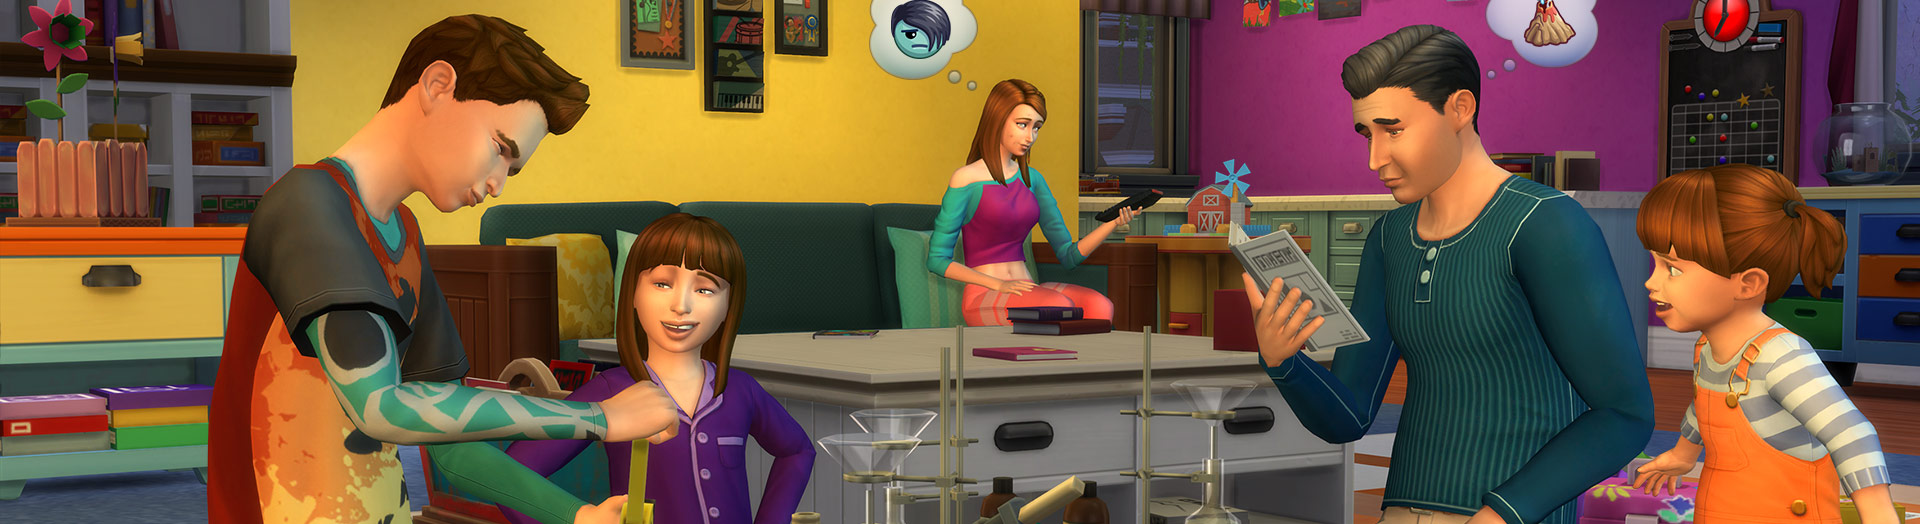 The Sims 4 Parenthood Game Pack: First Screenshots | SimsVIP